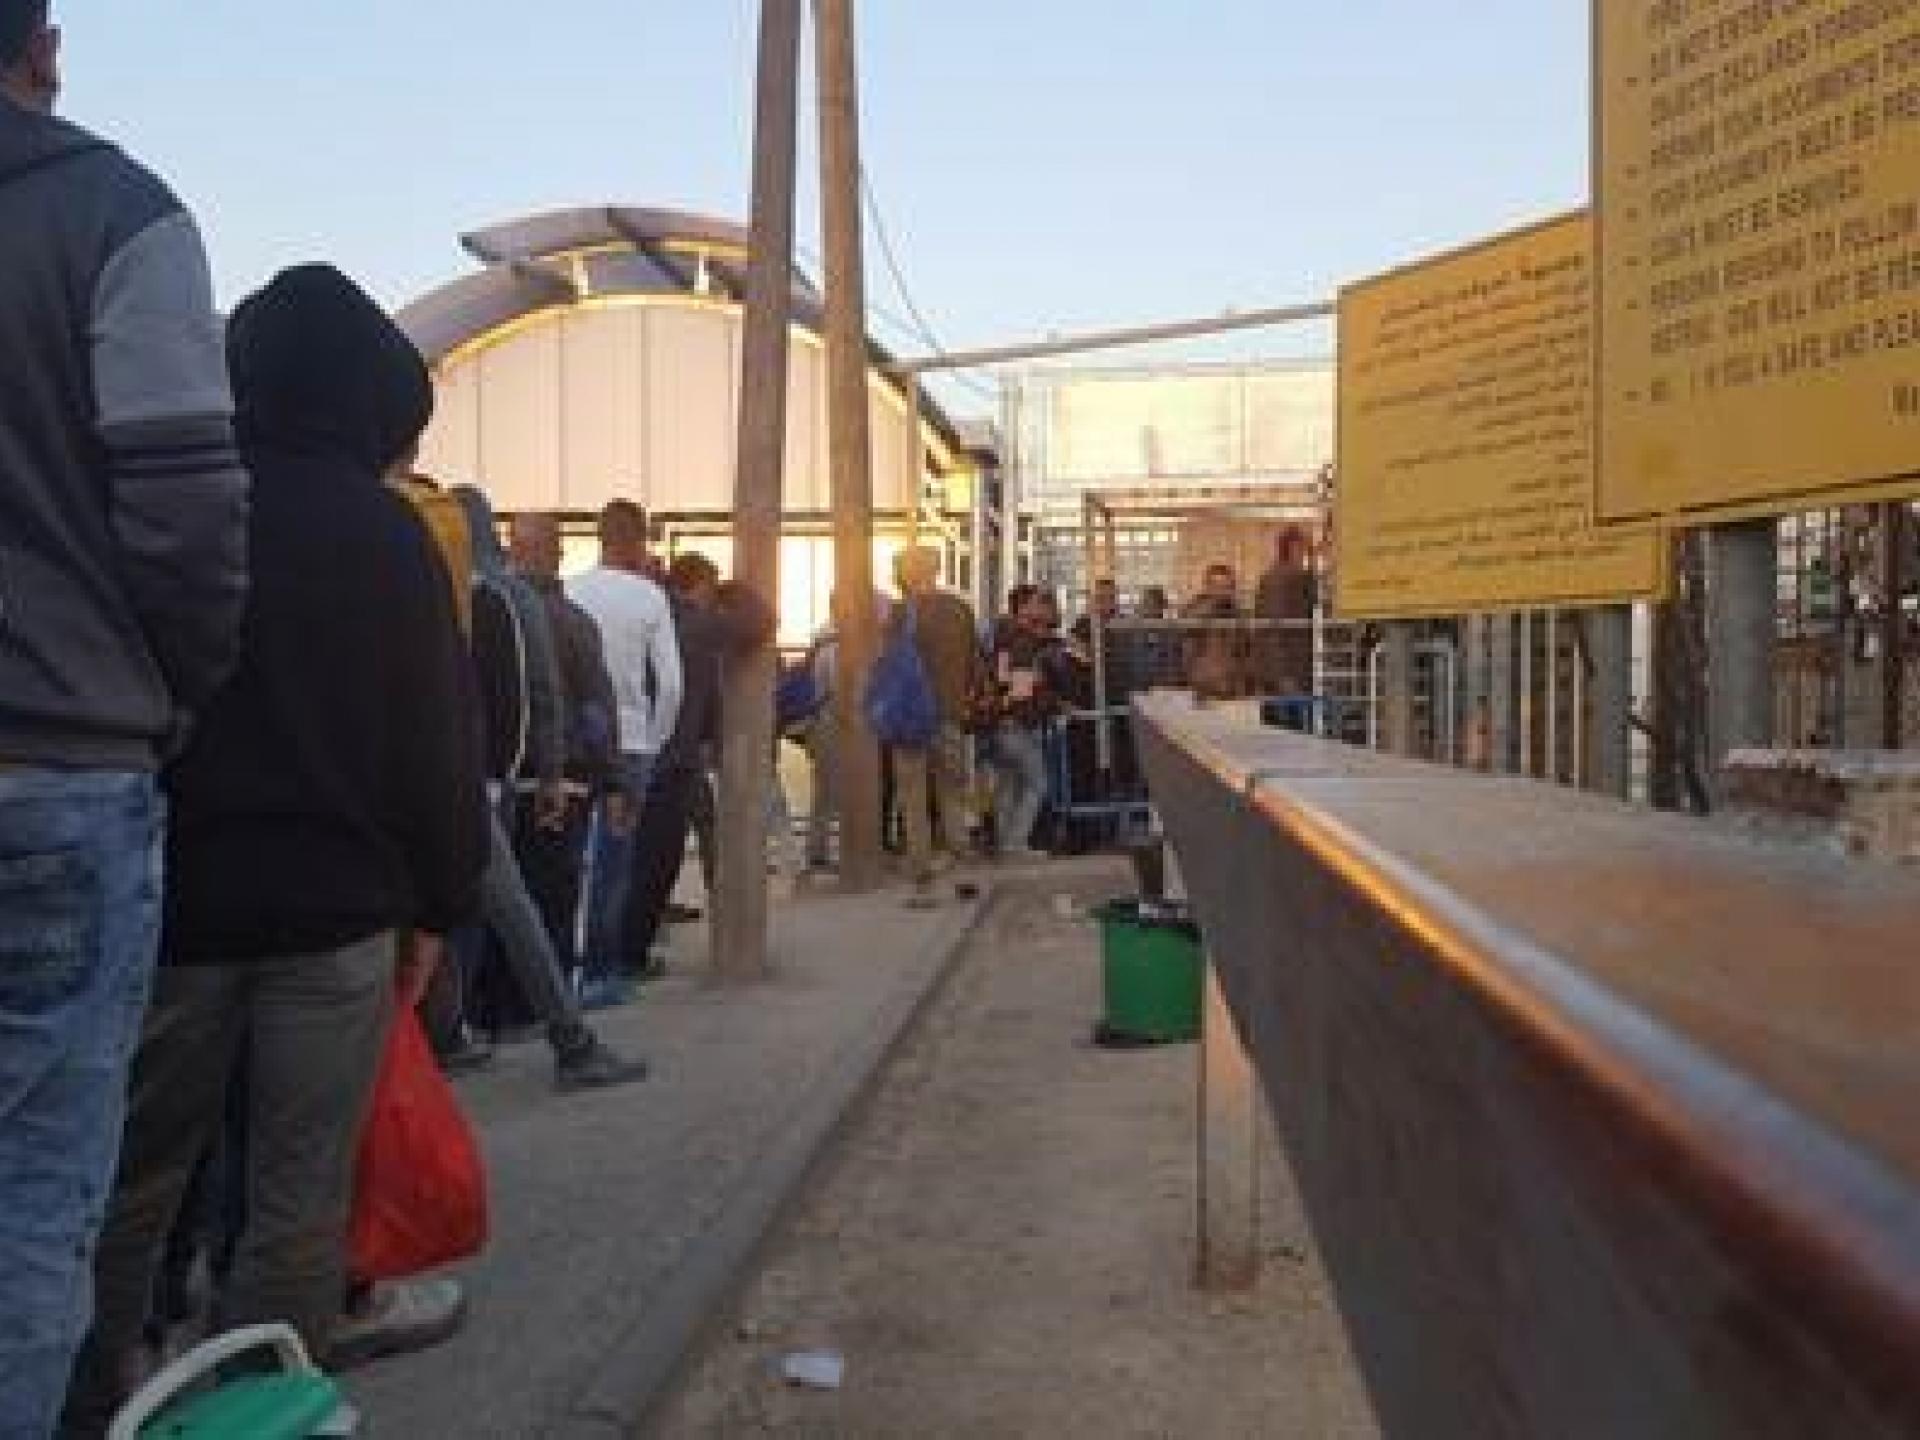 Barta’a Checkpoint – morning waiting line, standing and waiting together